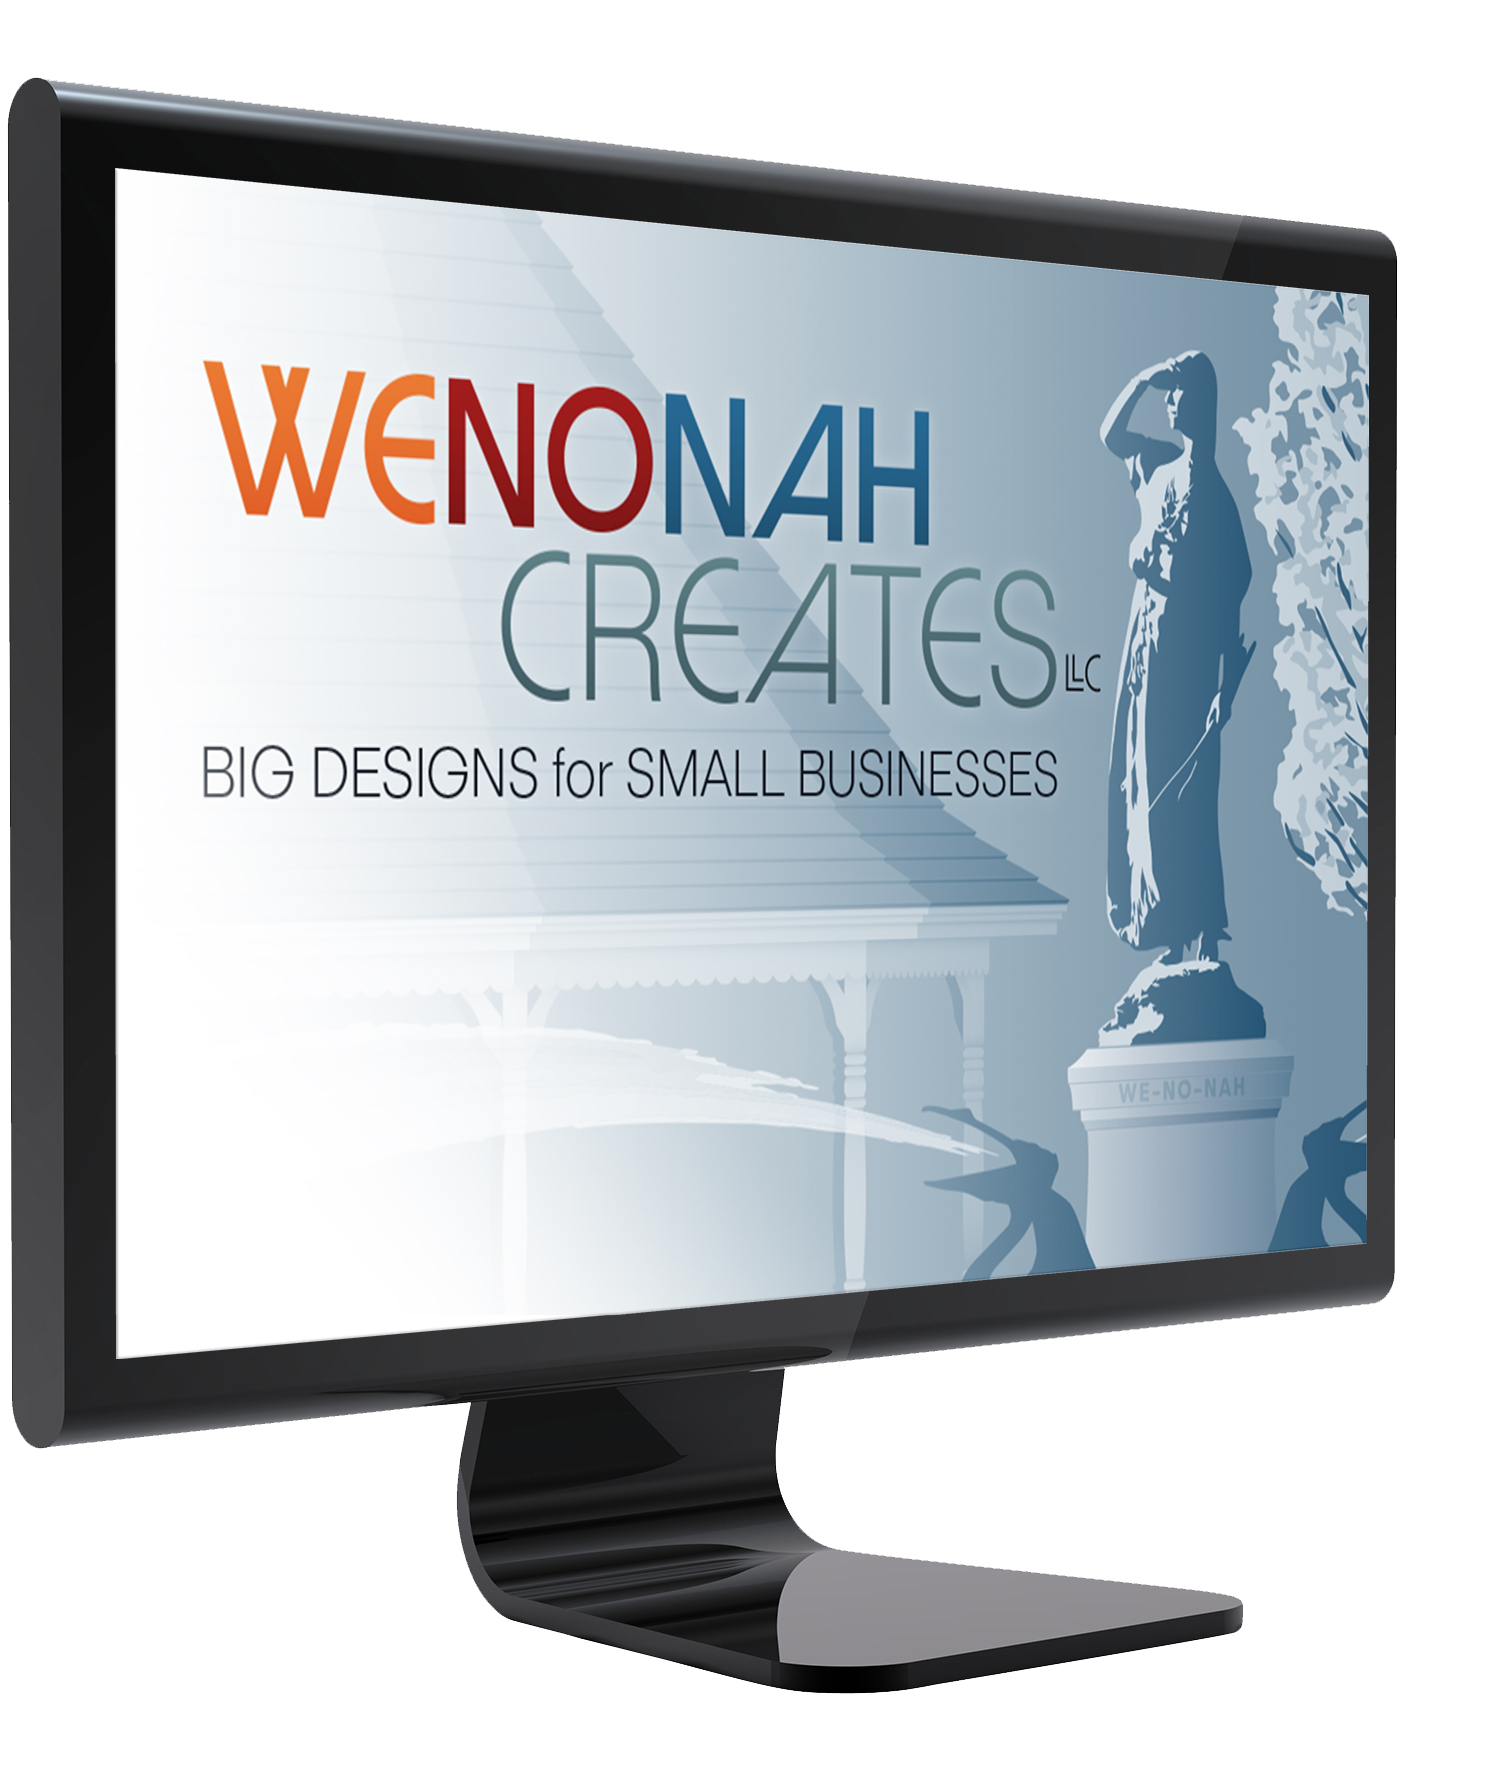 Wenonah Creates About